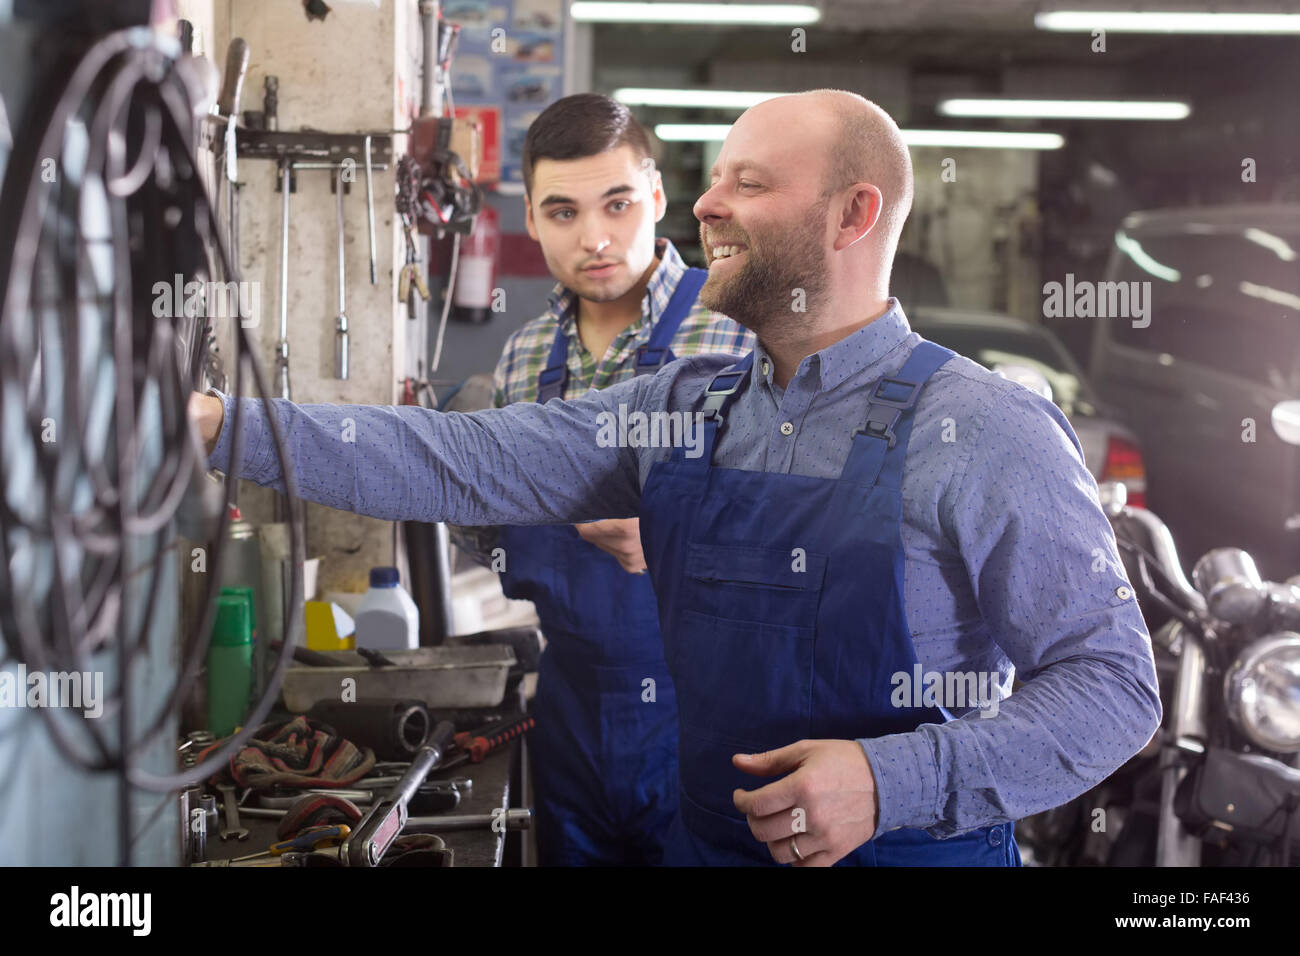 smiling european men in coveralls working at carshop Stock Photo